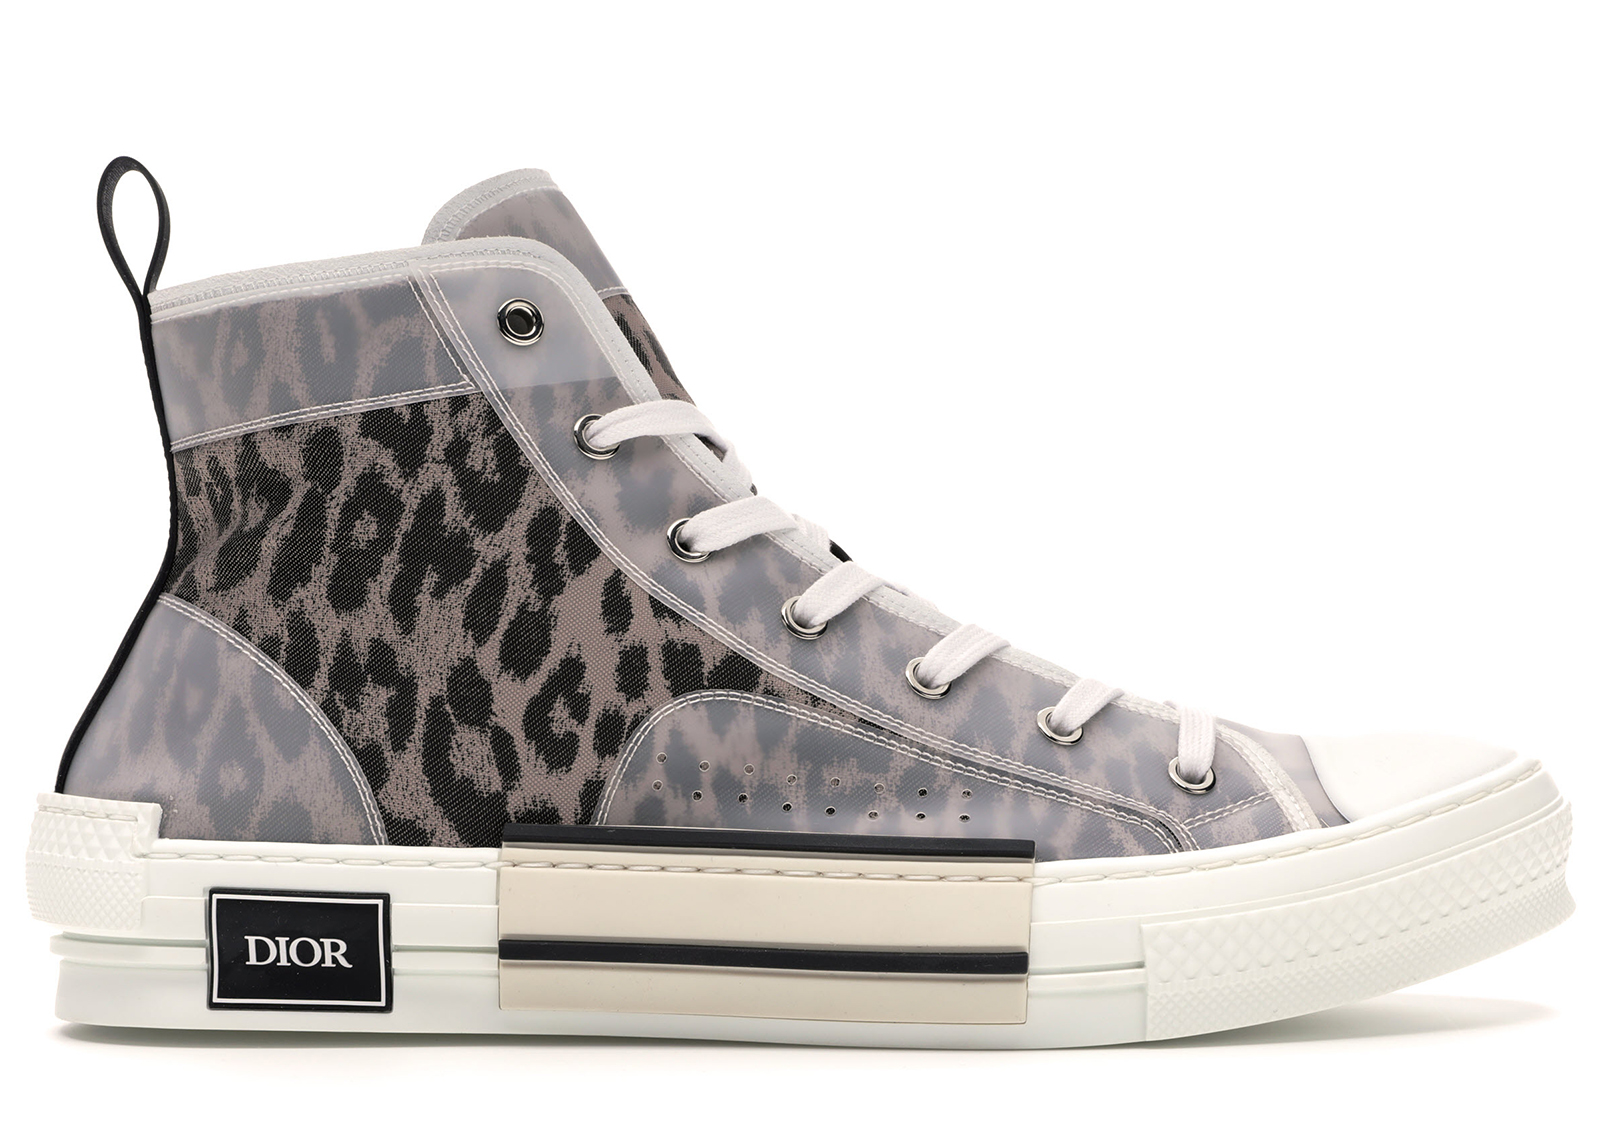 END on Twitter The Dior B23 Leopard High Sneaker is available in our  stores now httpstcoX3XTEcFOCV httpstcohcQCPT0Mu3  Twitter